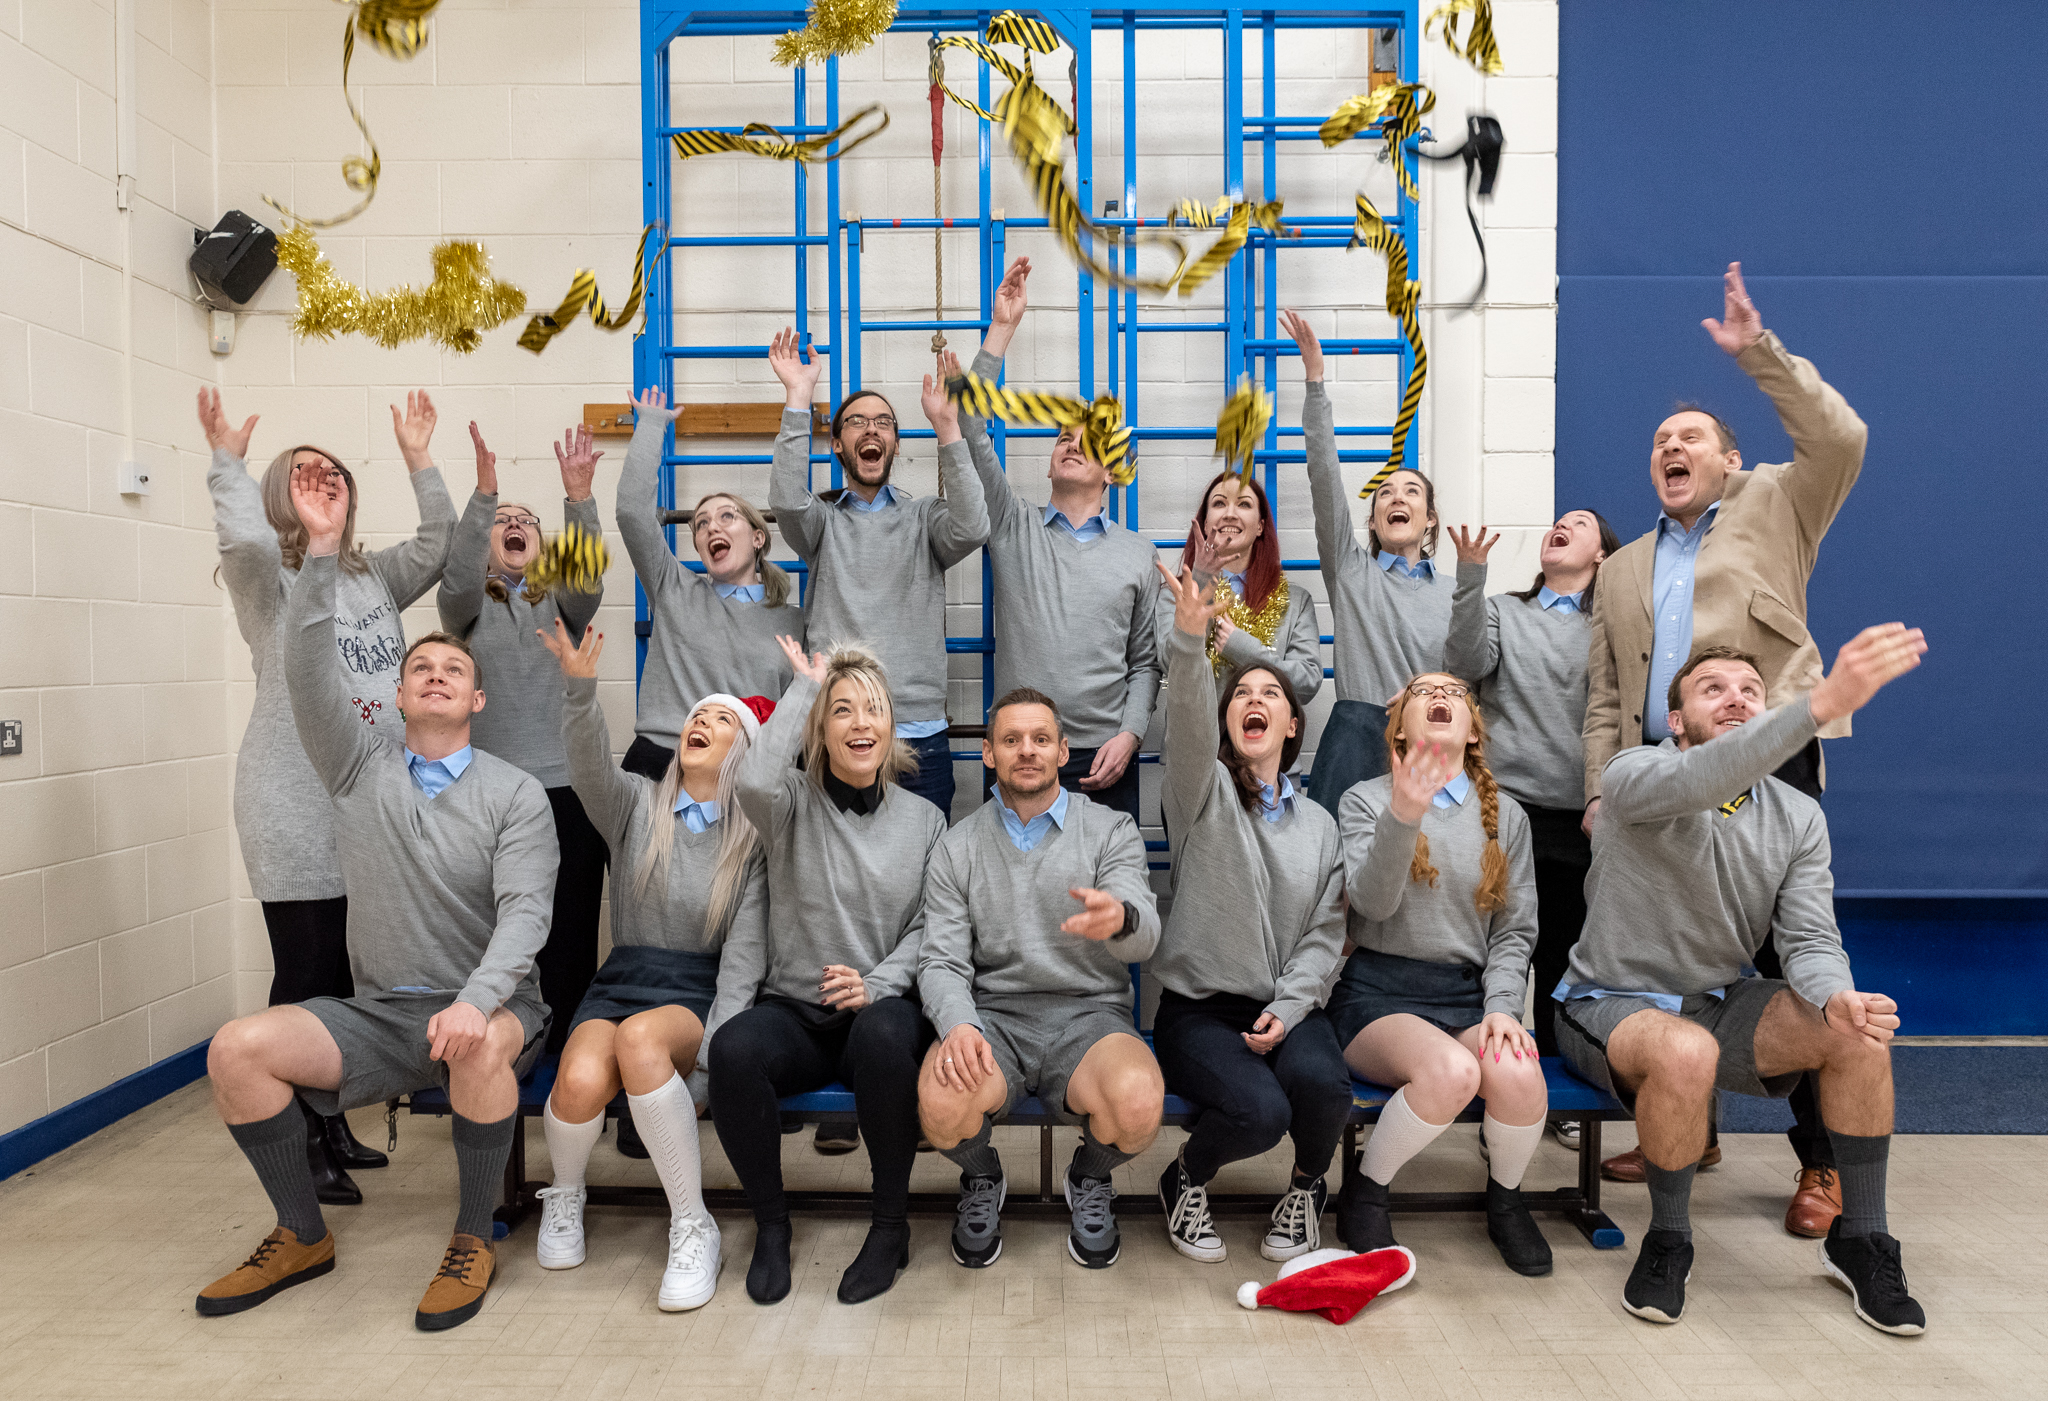 The Staff of We Are Boutique dressed up as School Children, throwing their ties in the air, looking joyous. 